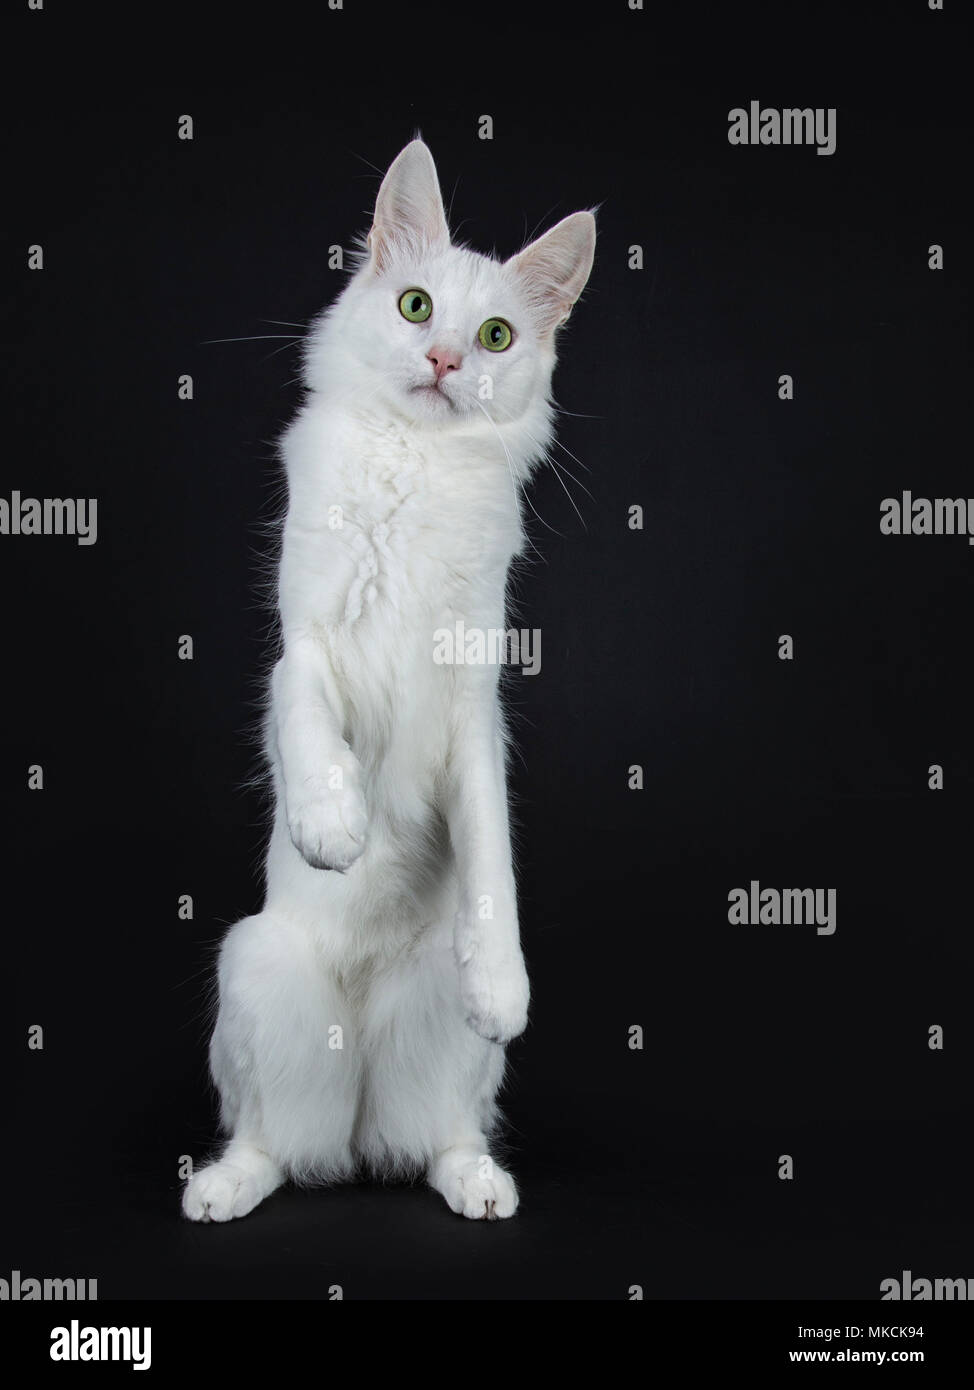 Solid white Turkish Angora cat with green eyes standing on back paws like meerkat isolated on black background looking at camera Stock Photo